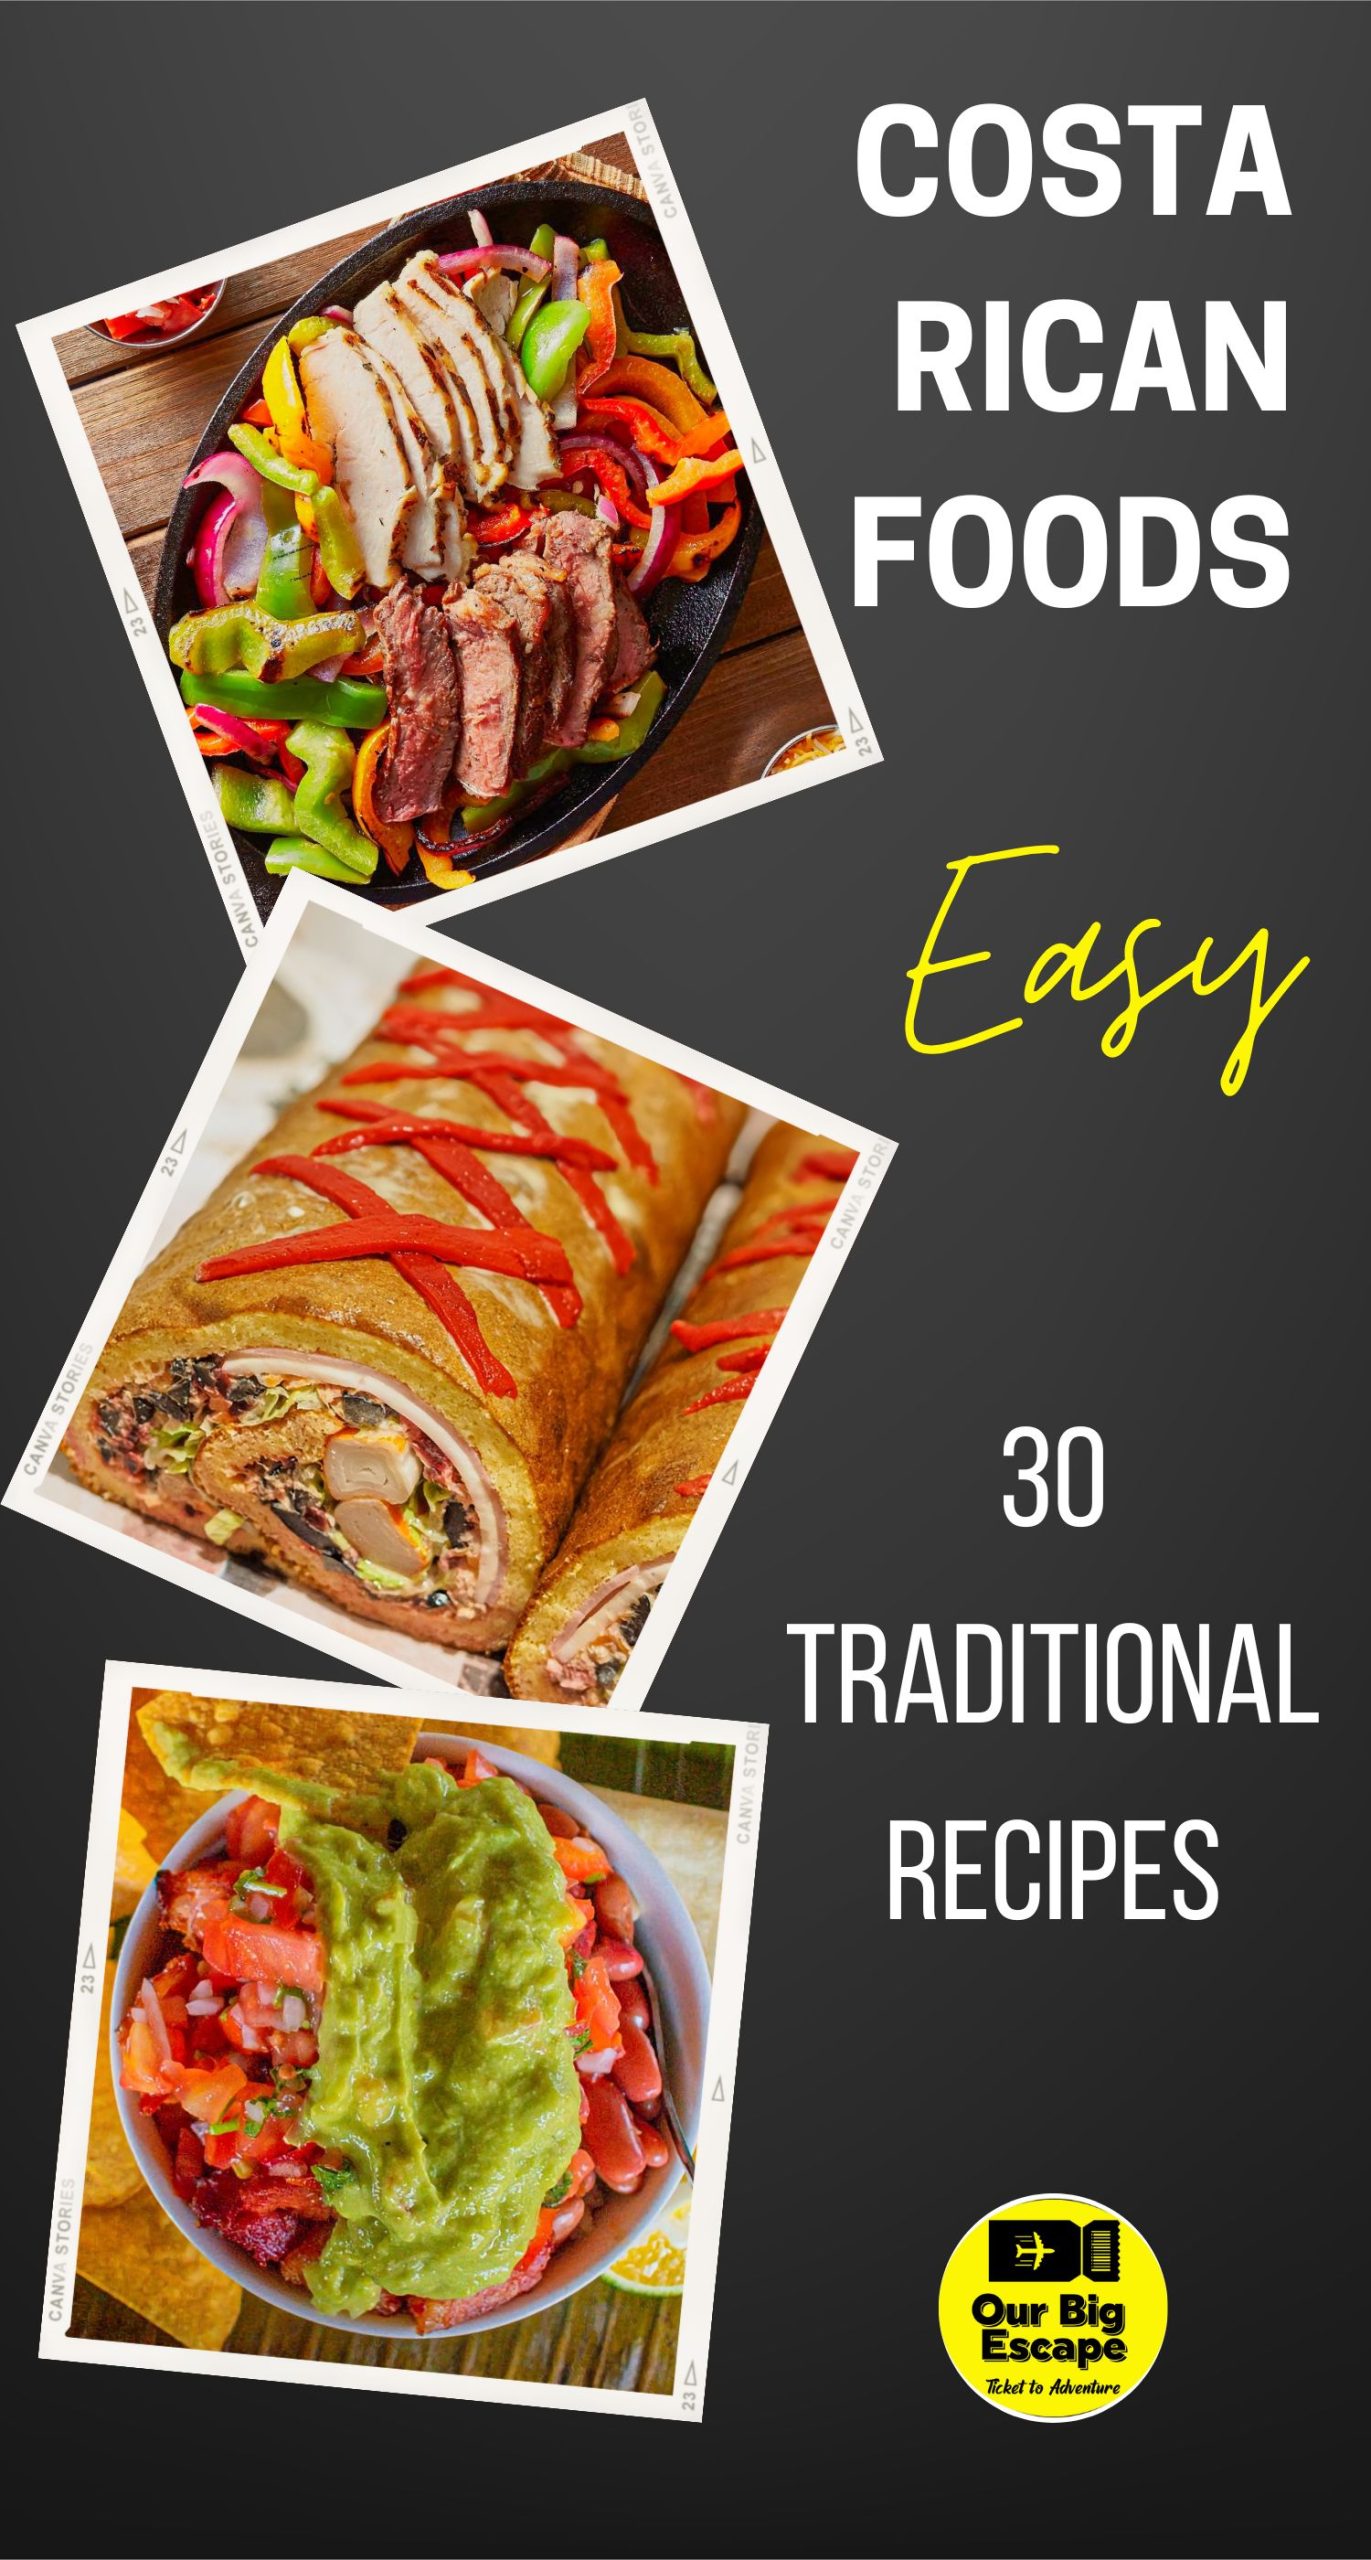 30 Traditional Costa Rican Foods With Easy Recipes PIN